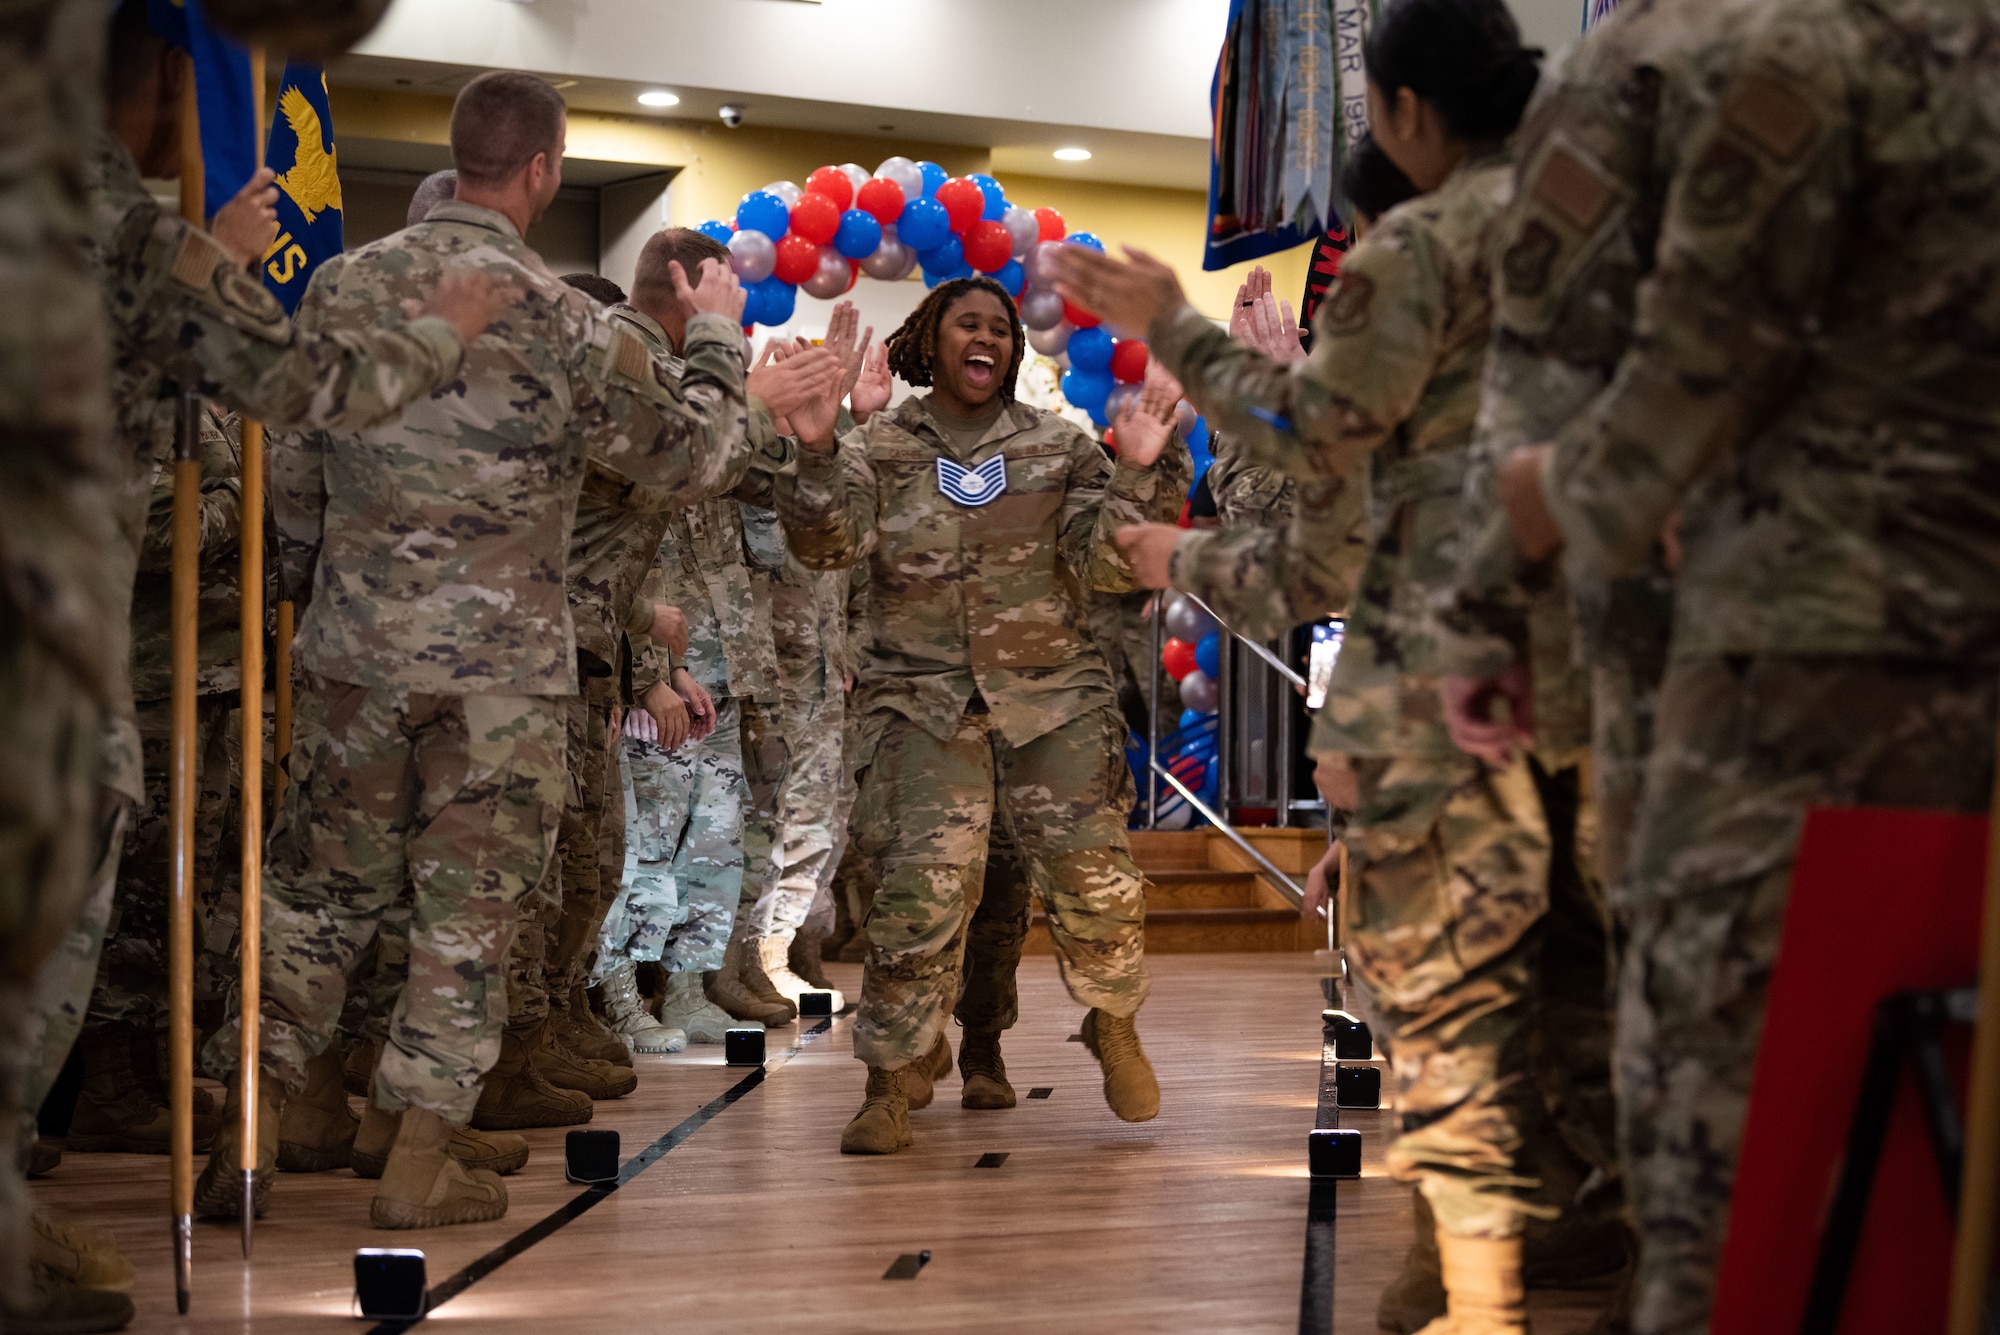 A technical sergeant select high fives her peers during a promotion release ceremony at Osan Air Base, South Korea, July 21, 2022. Technical sergeants are experts in their career field, providing supervision to their subordinates and assisting their team with attention to detail, positive work climates and clear communication. (U.S. Air Force photo by Senior Airman Megan Estrada)